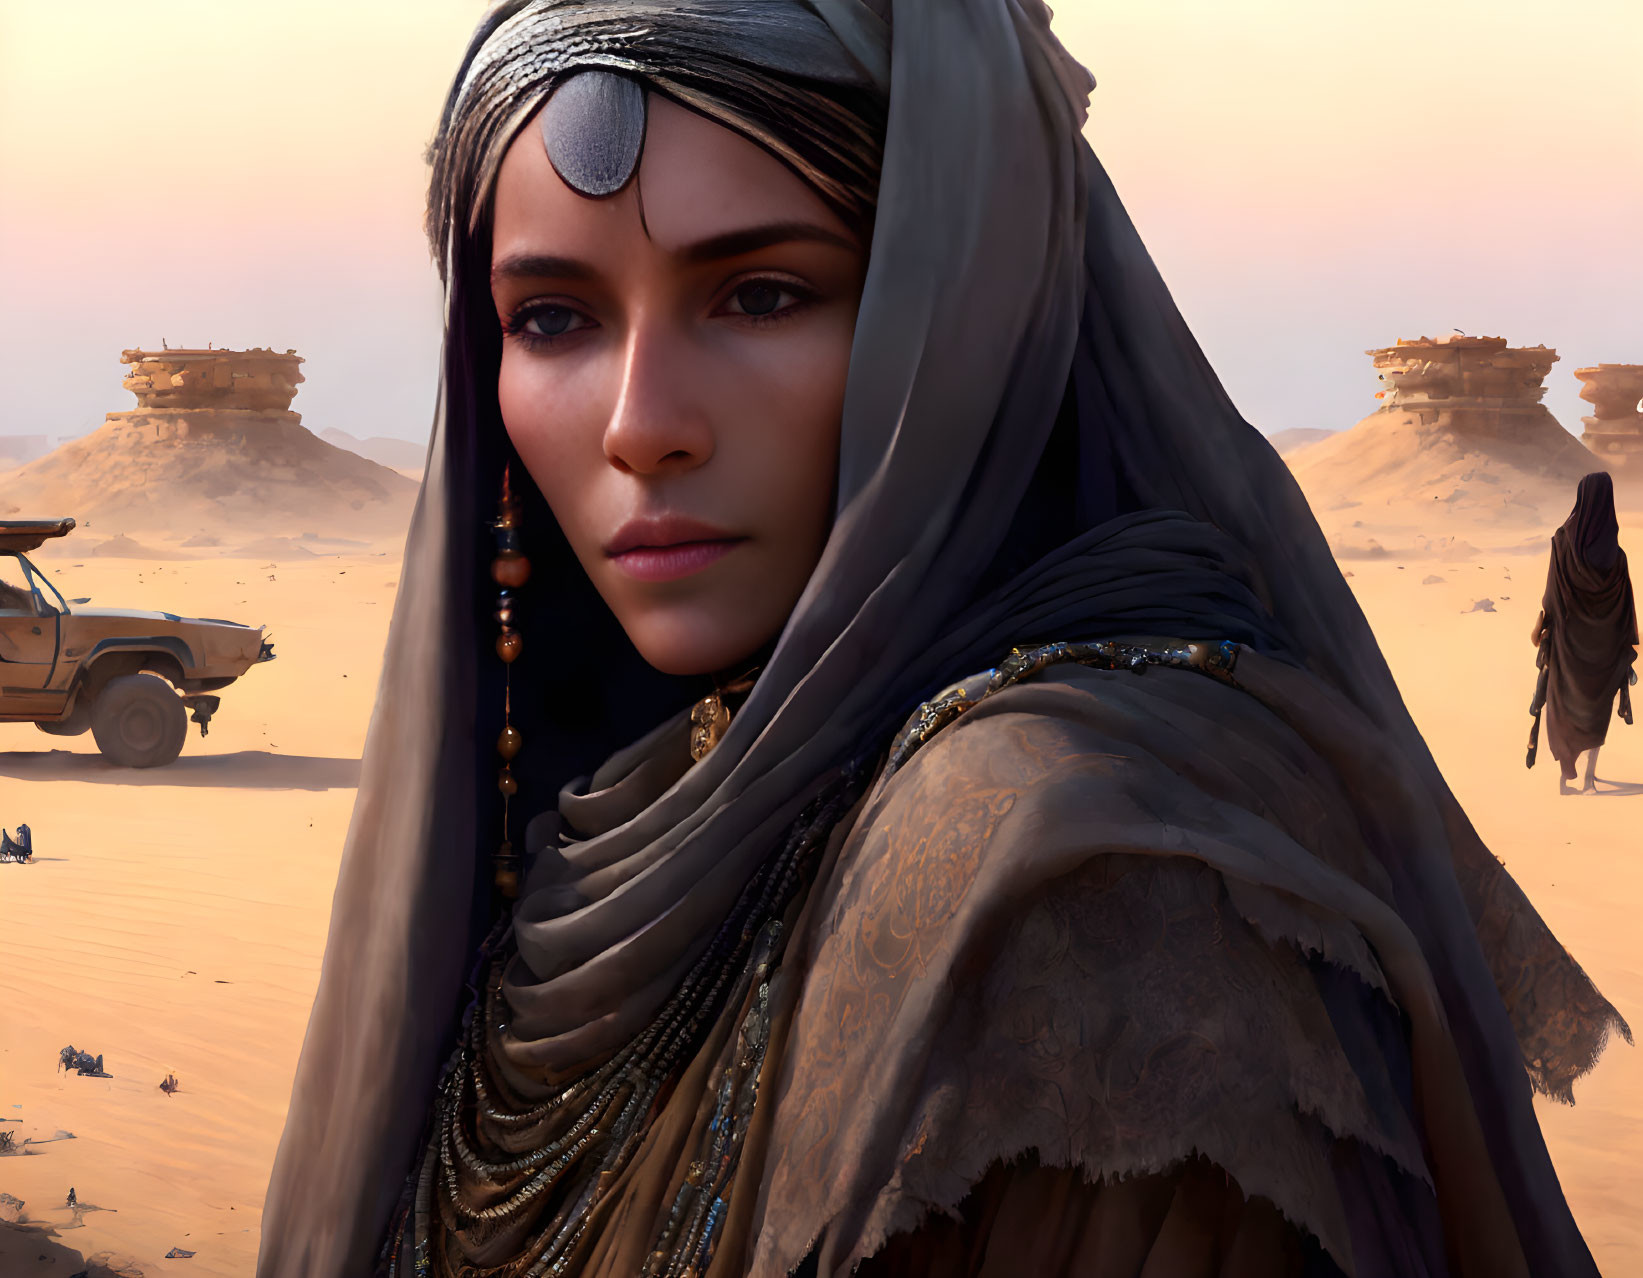 Digital artwork of woman in desert attire with scarf and jewelry, gazing at rocky formations, vehicle,